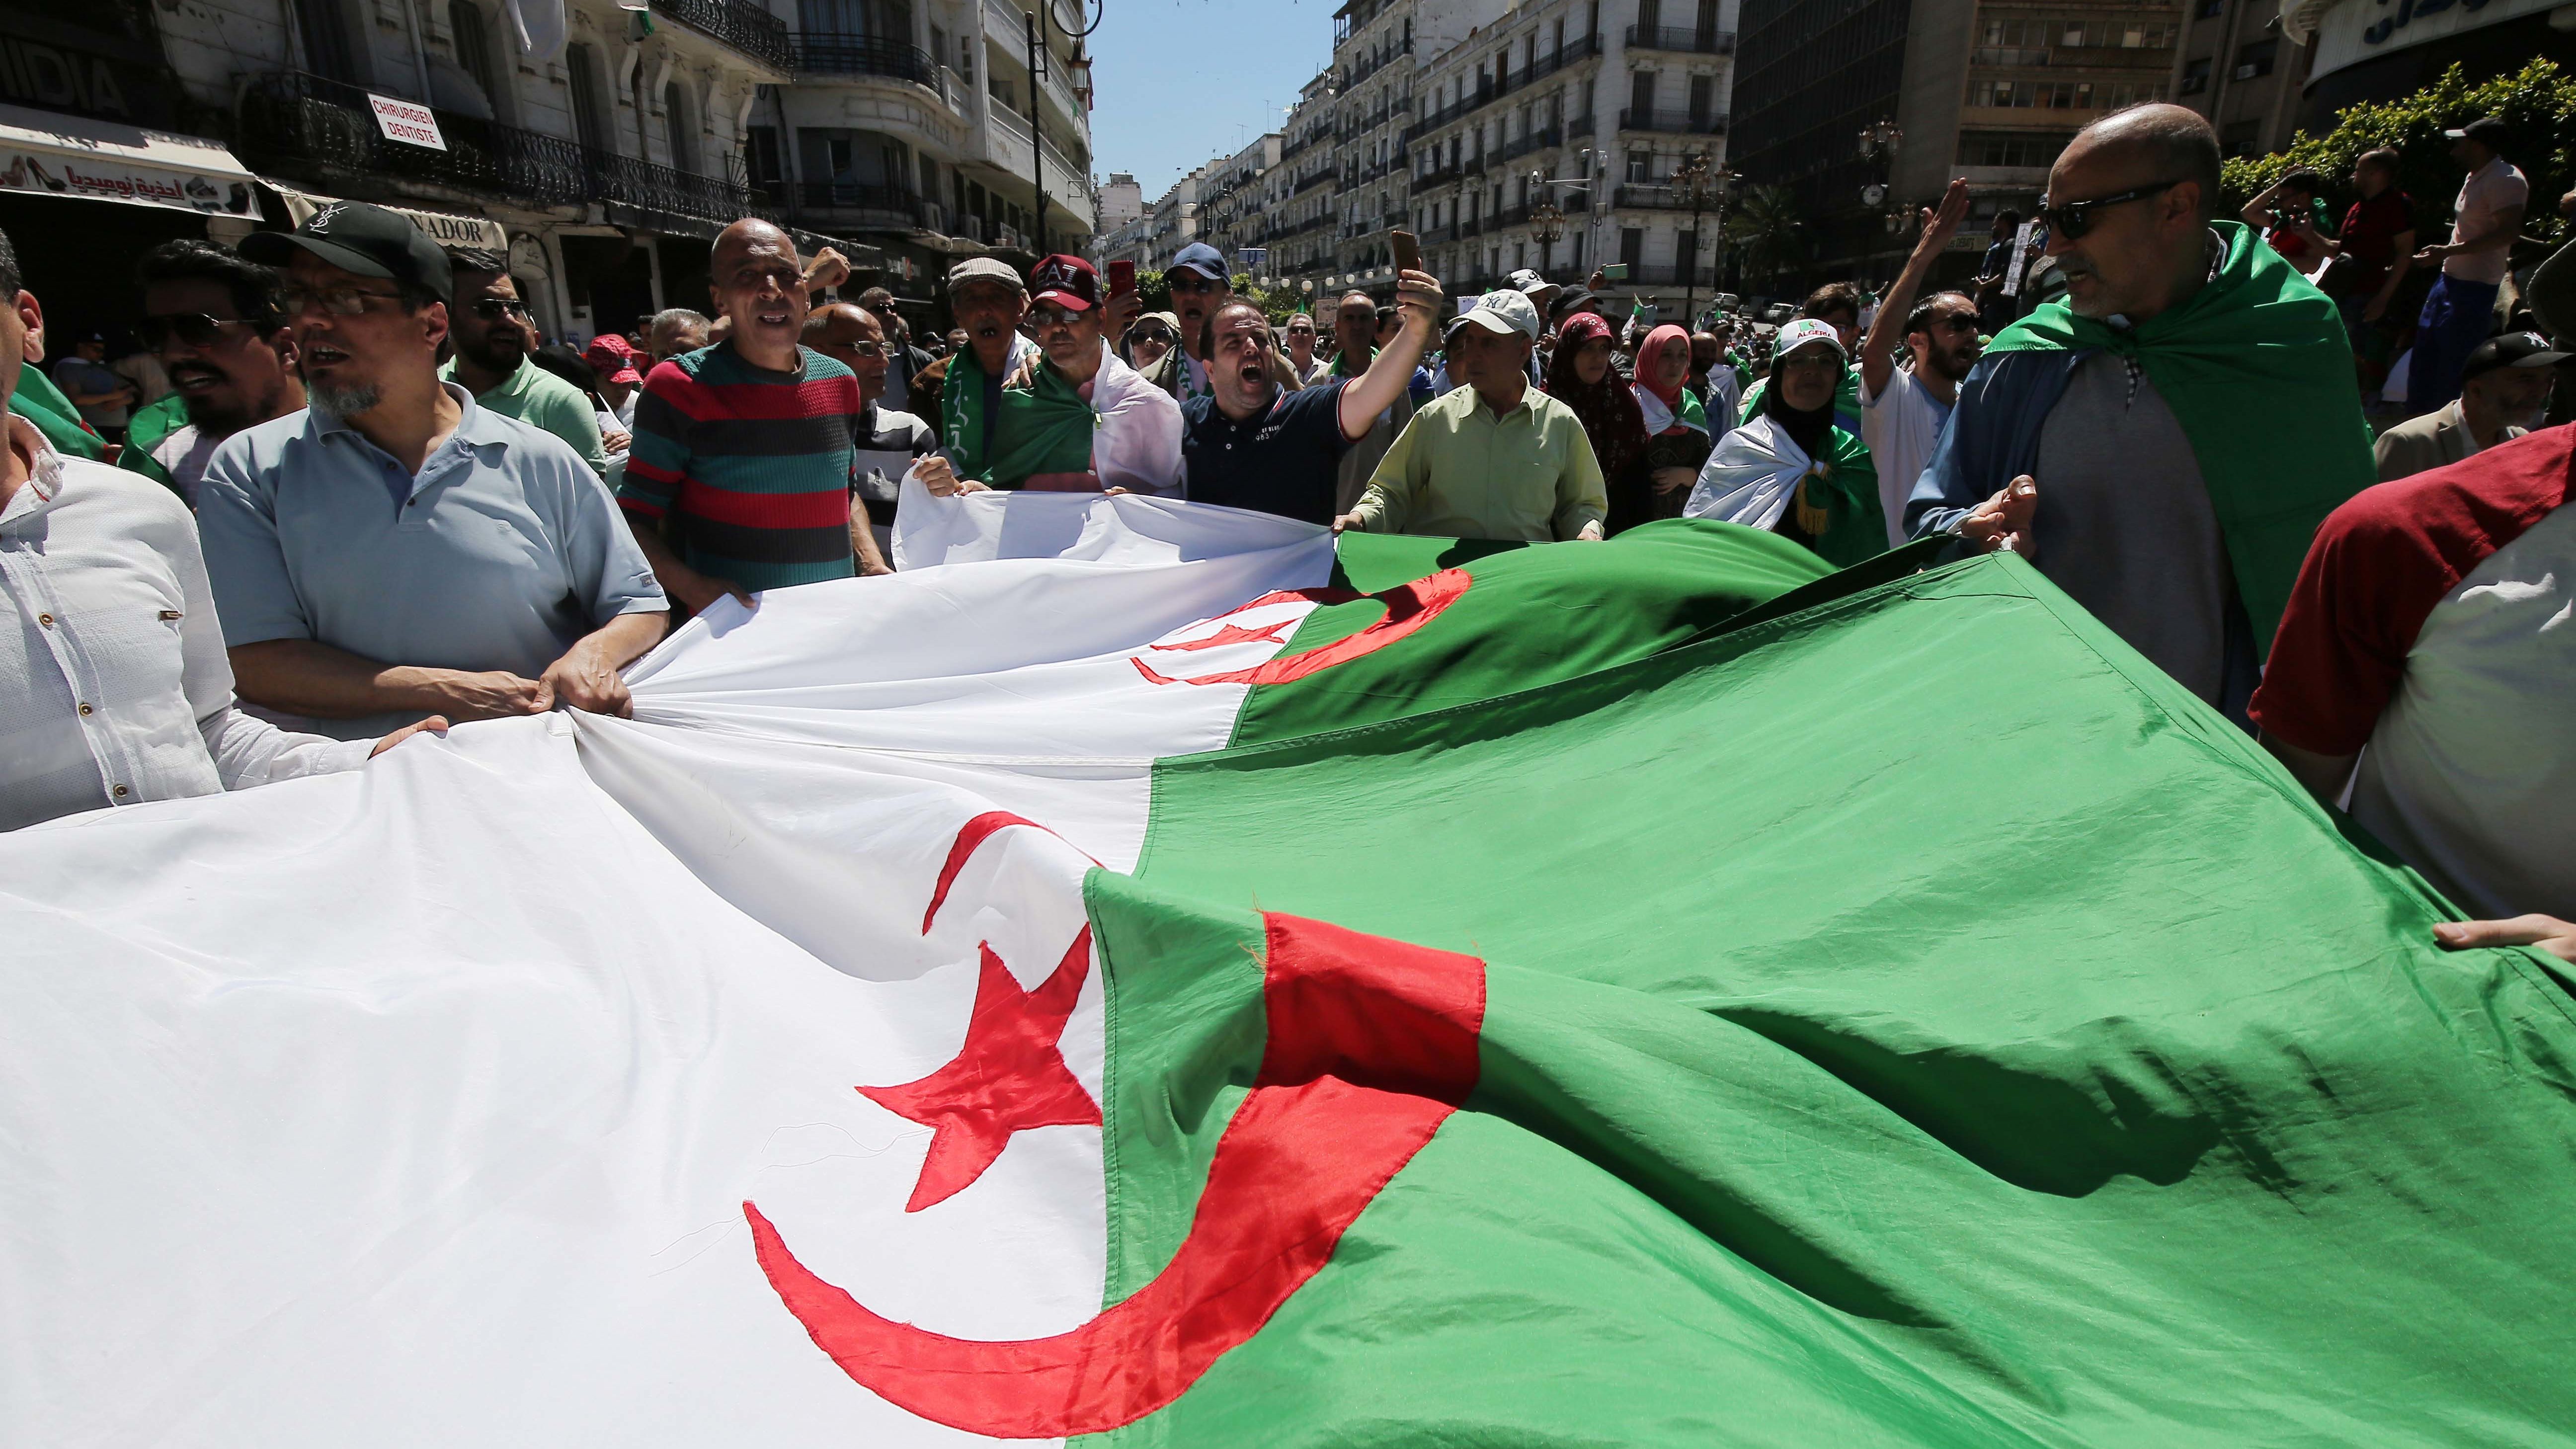 Crowds Continue to March in Algeria to Topple Ruling Elite